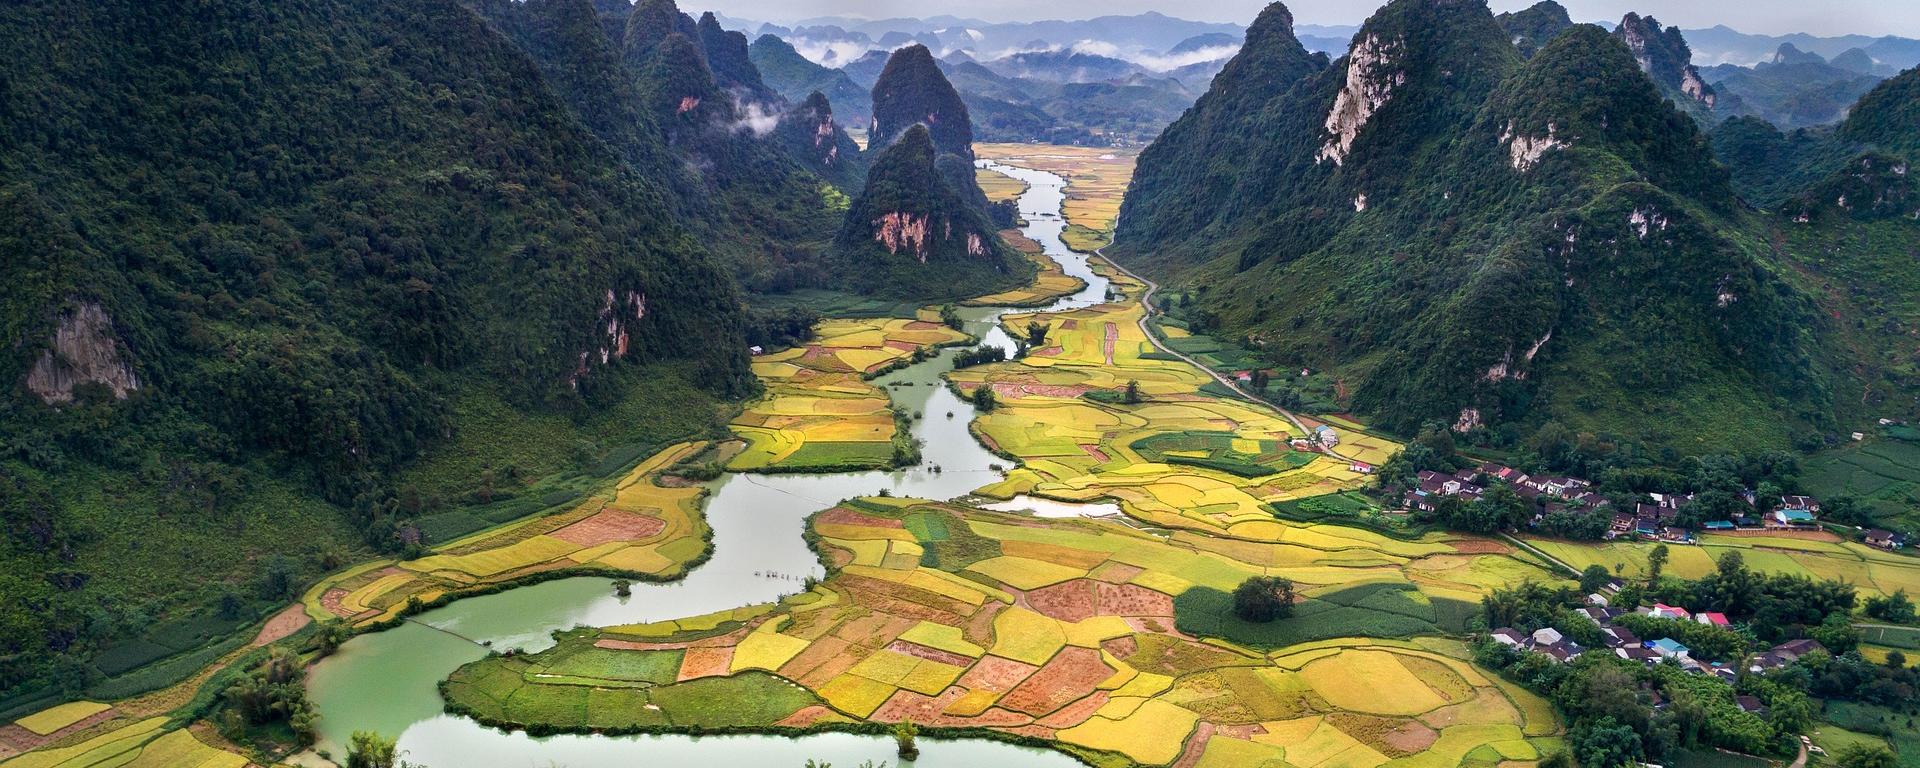 Aerial view of mountain with rice fields